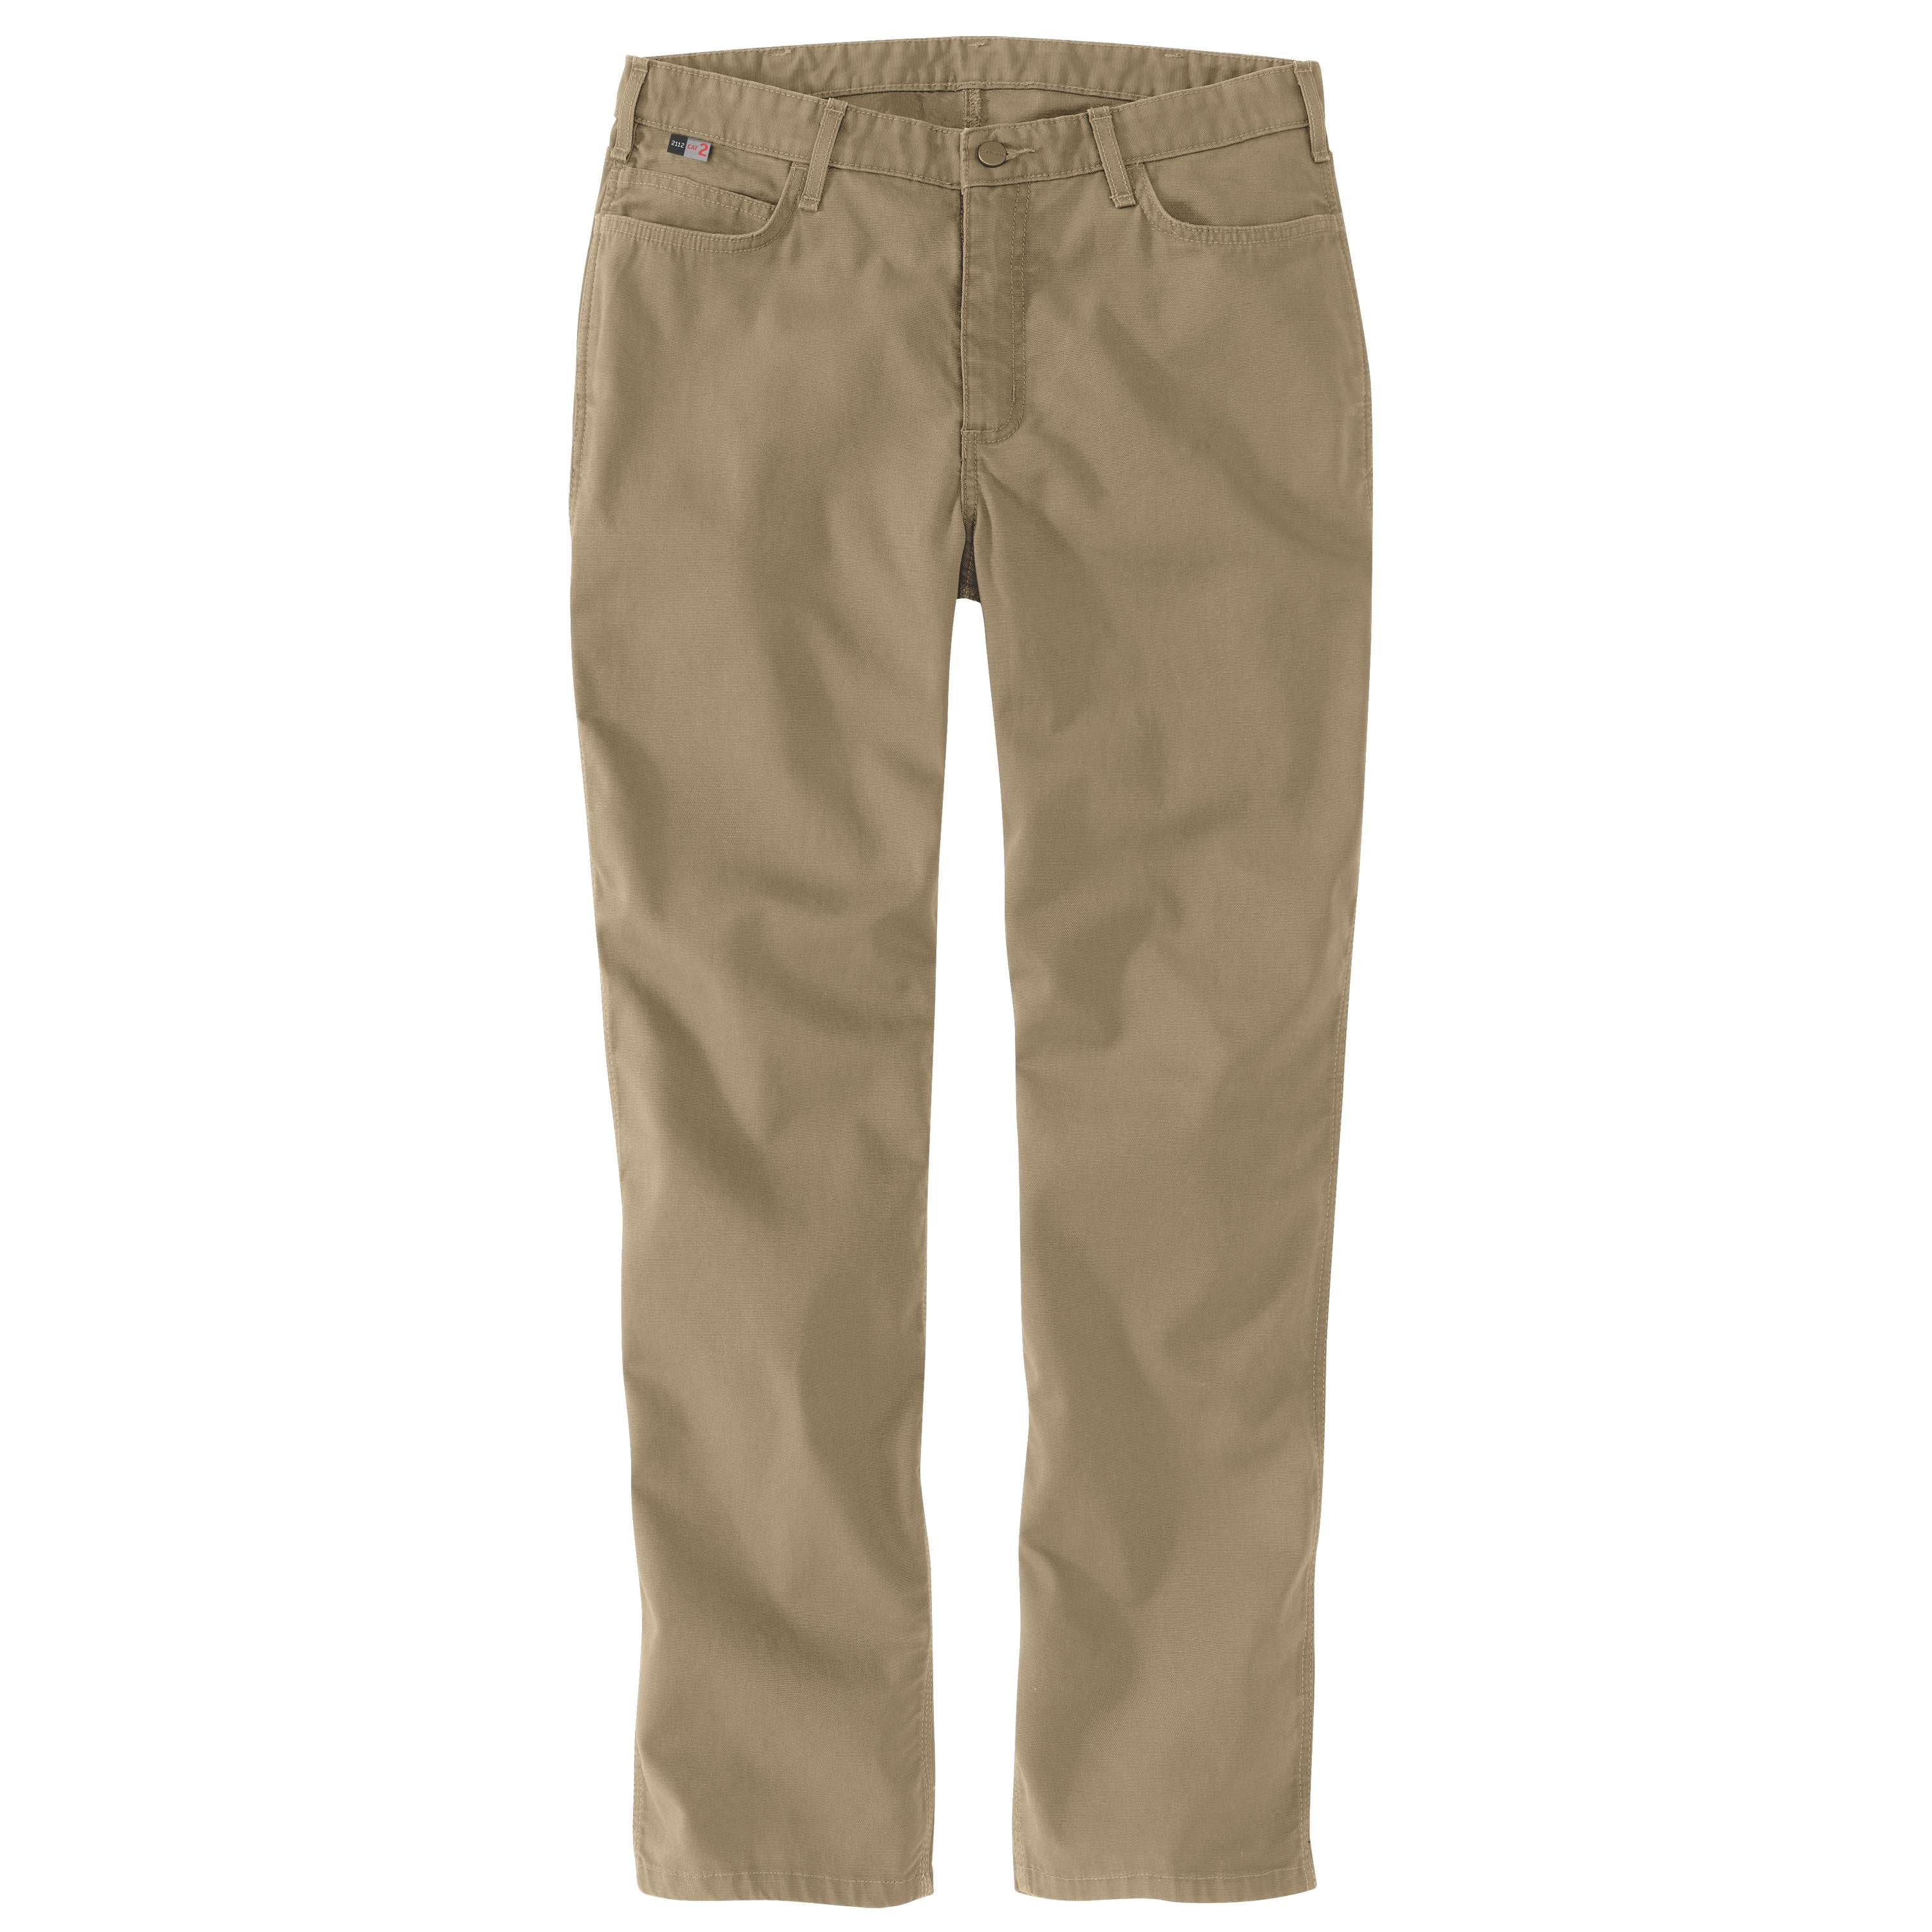 Carhartt, FR Rugged Flex Relaxed Fit Utility Work Pant